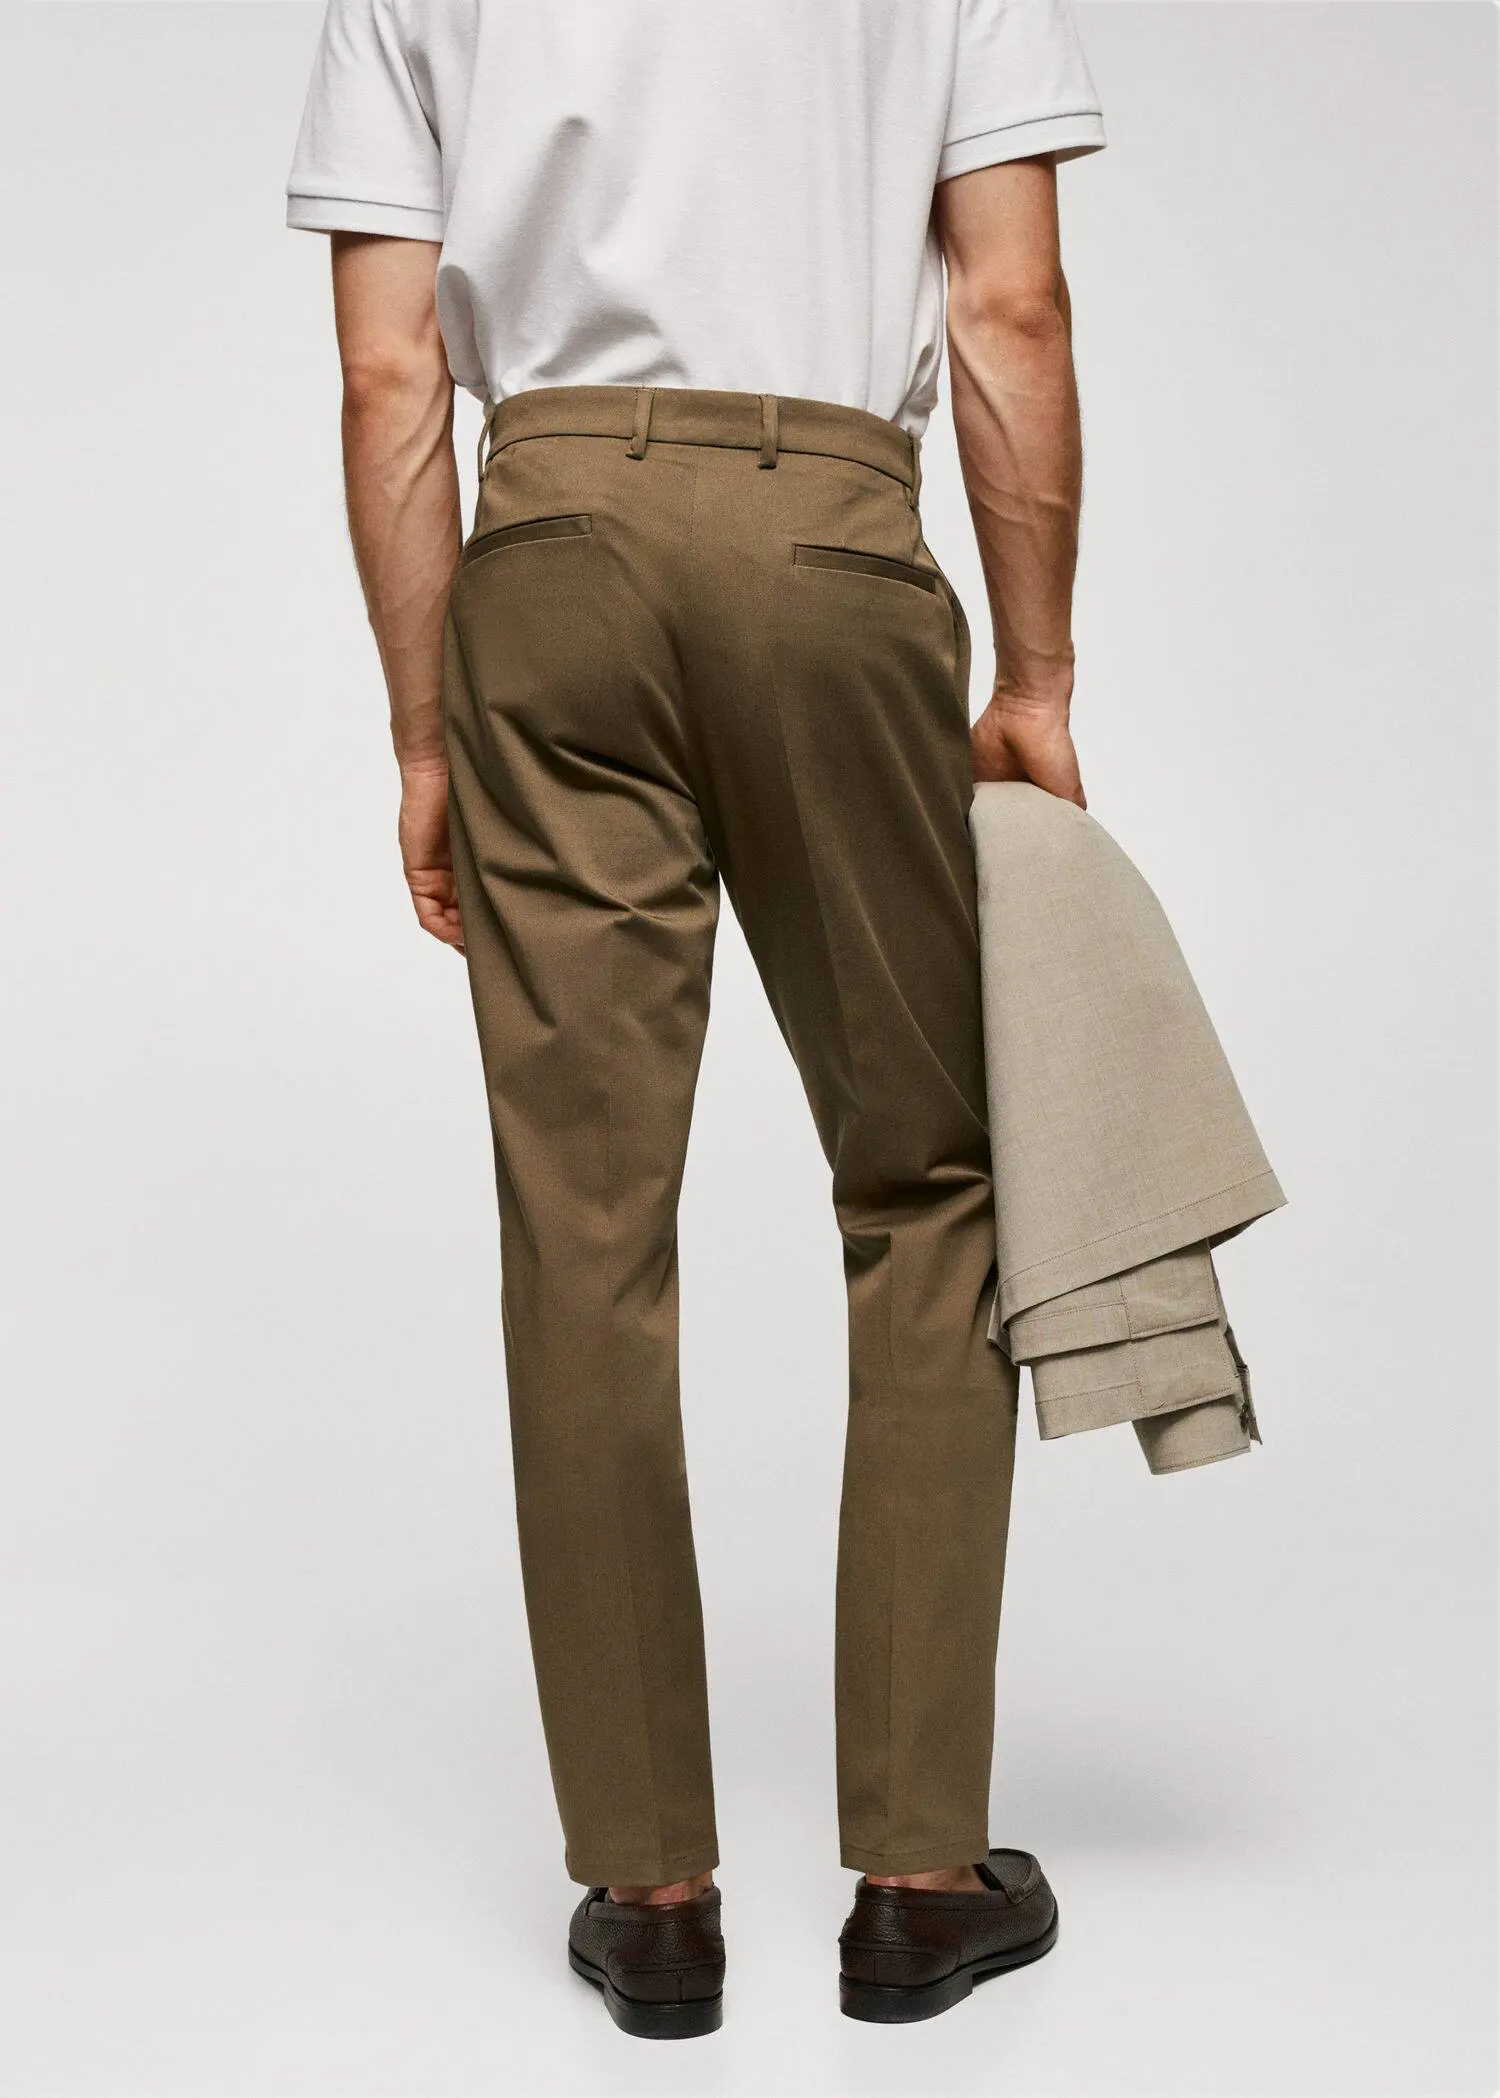 Mango Slim fit chino trousers. a man in a tan suit is holding his jacket. 